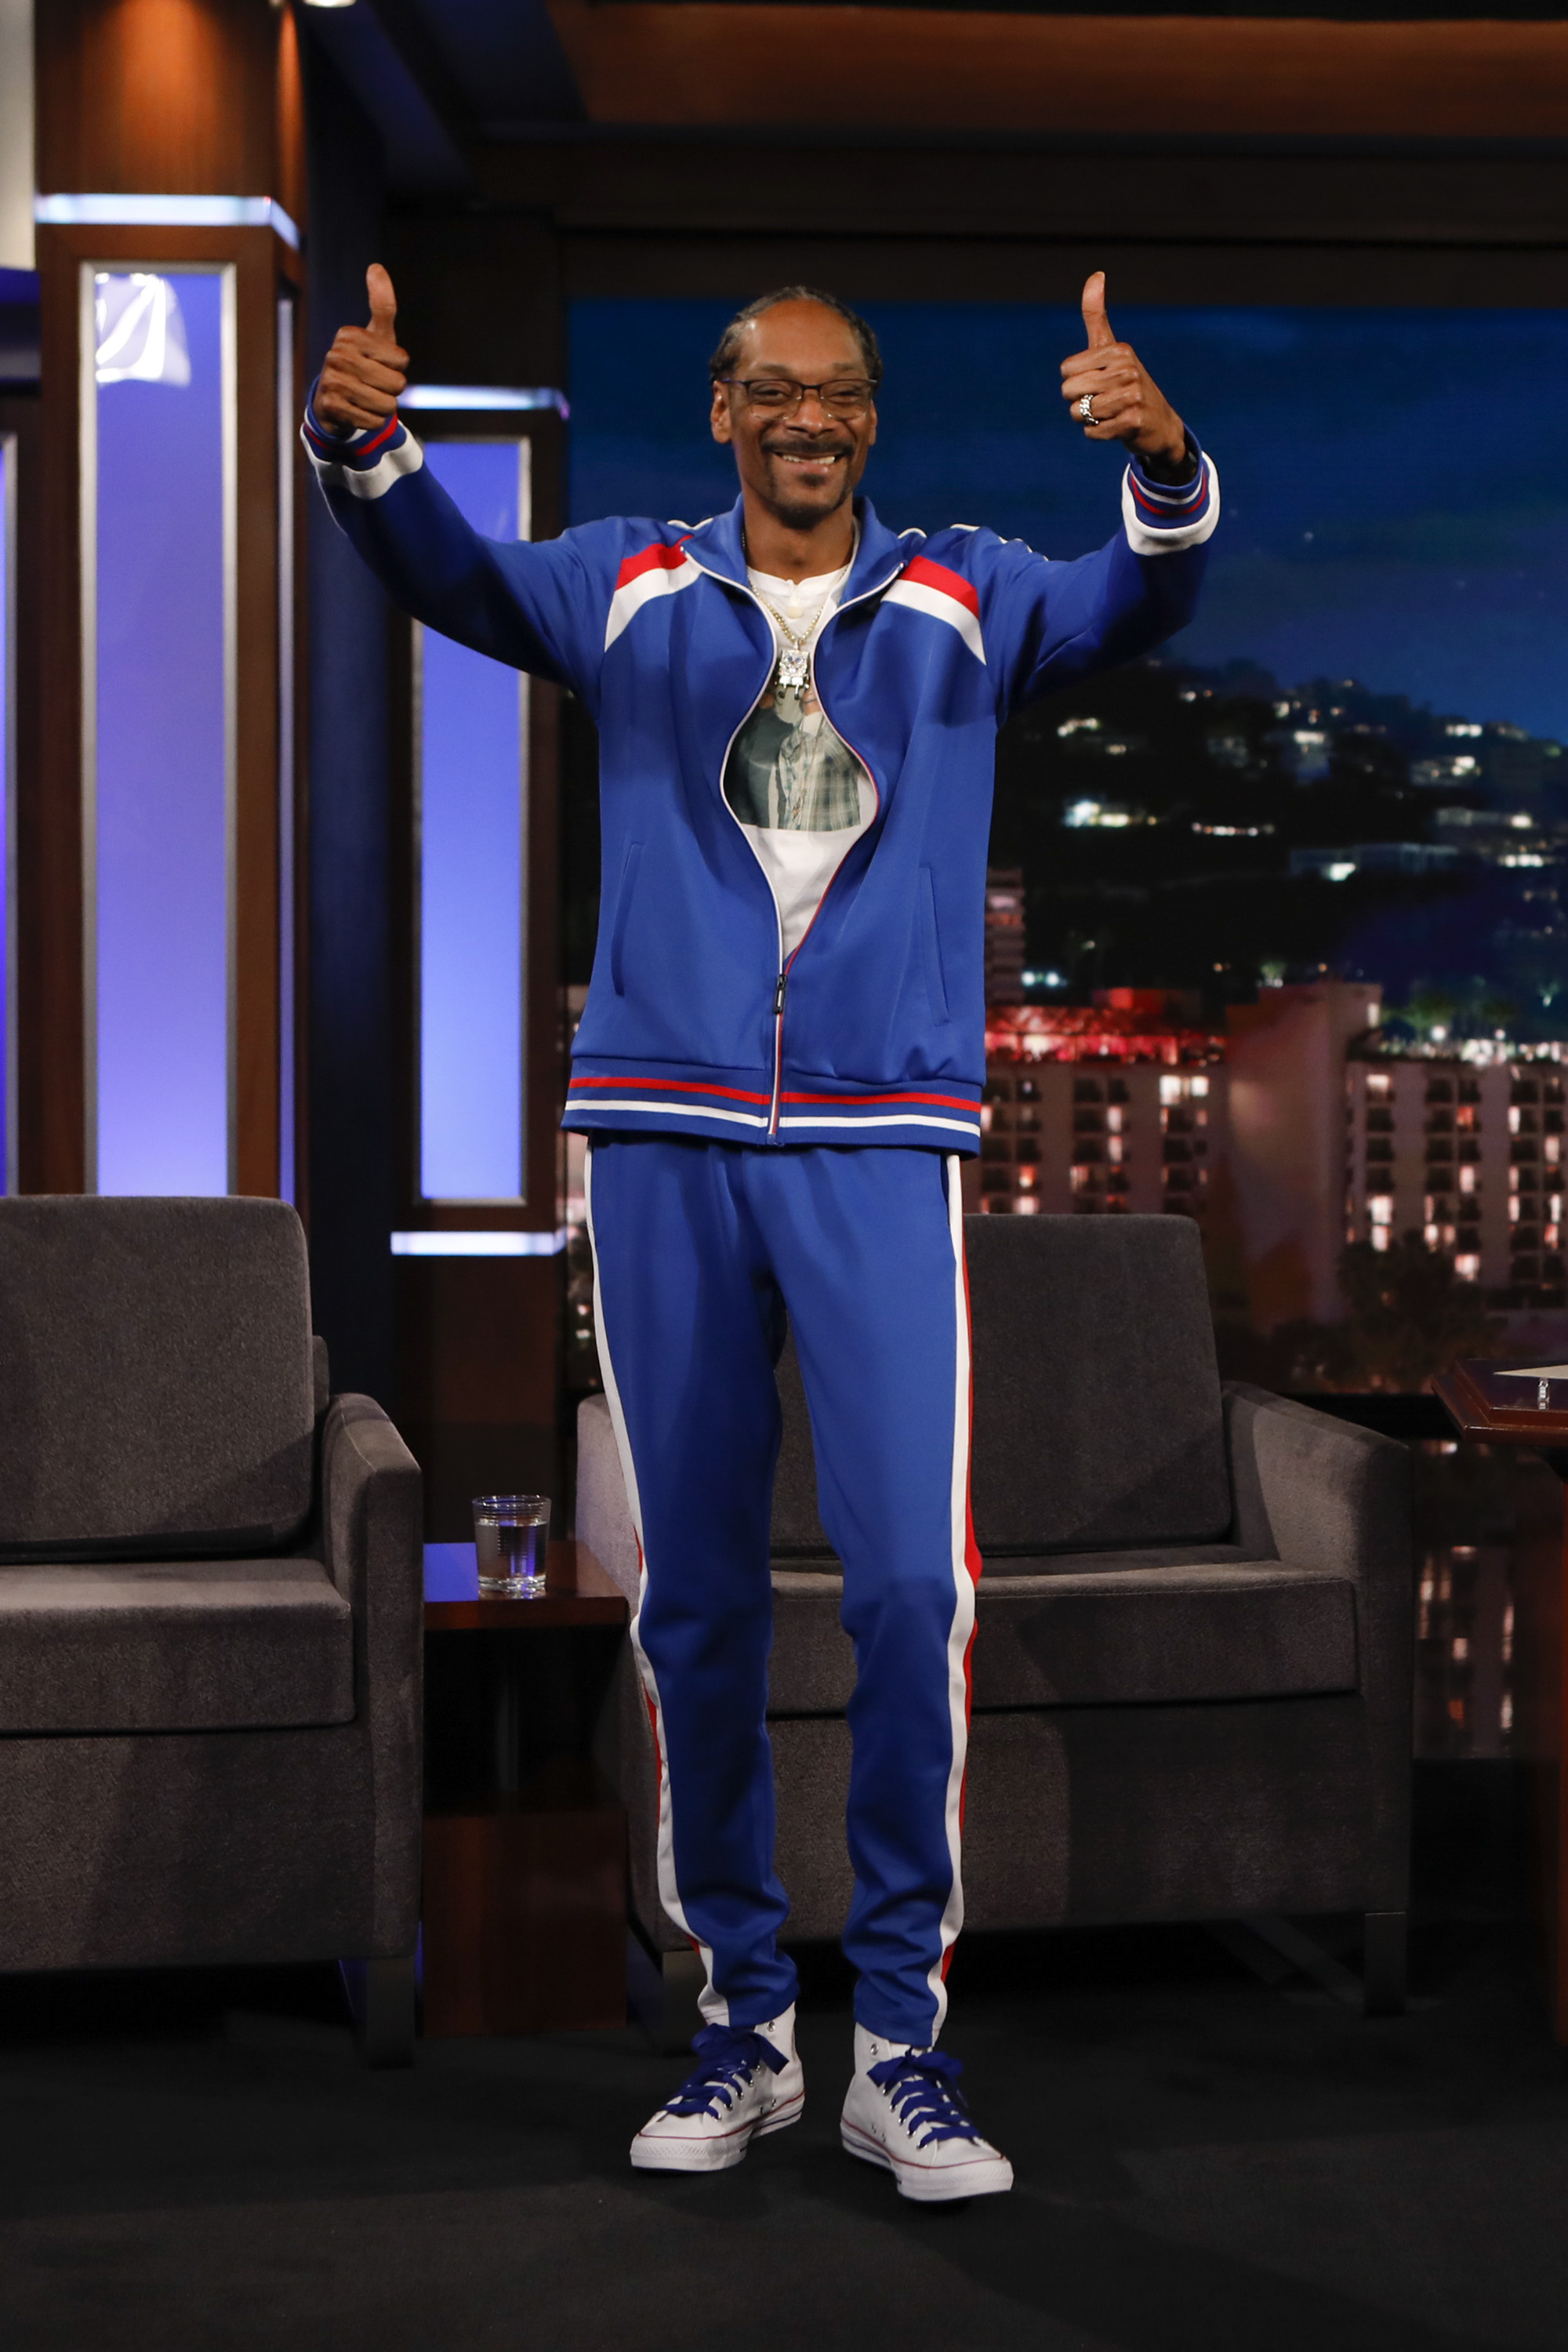 In Case You Missed It: Snoop Dogg On Jimmy Kimmel Live